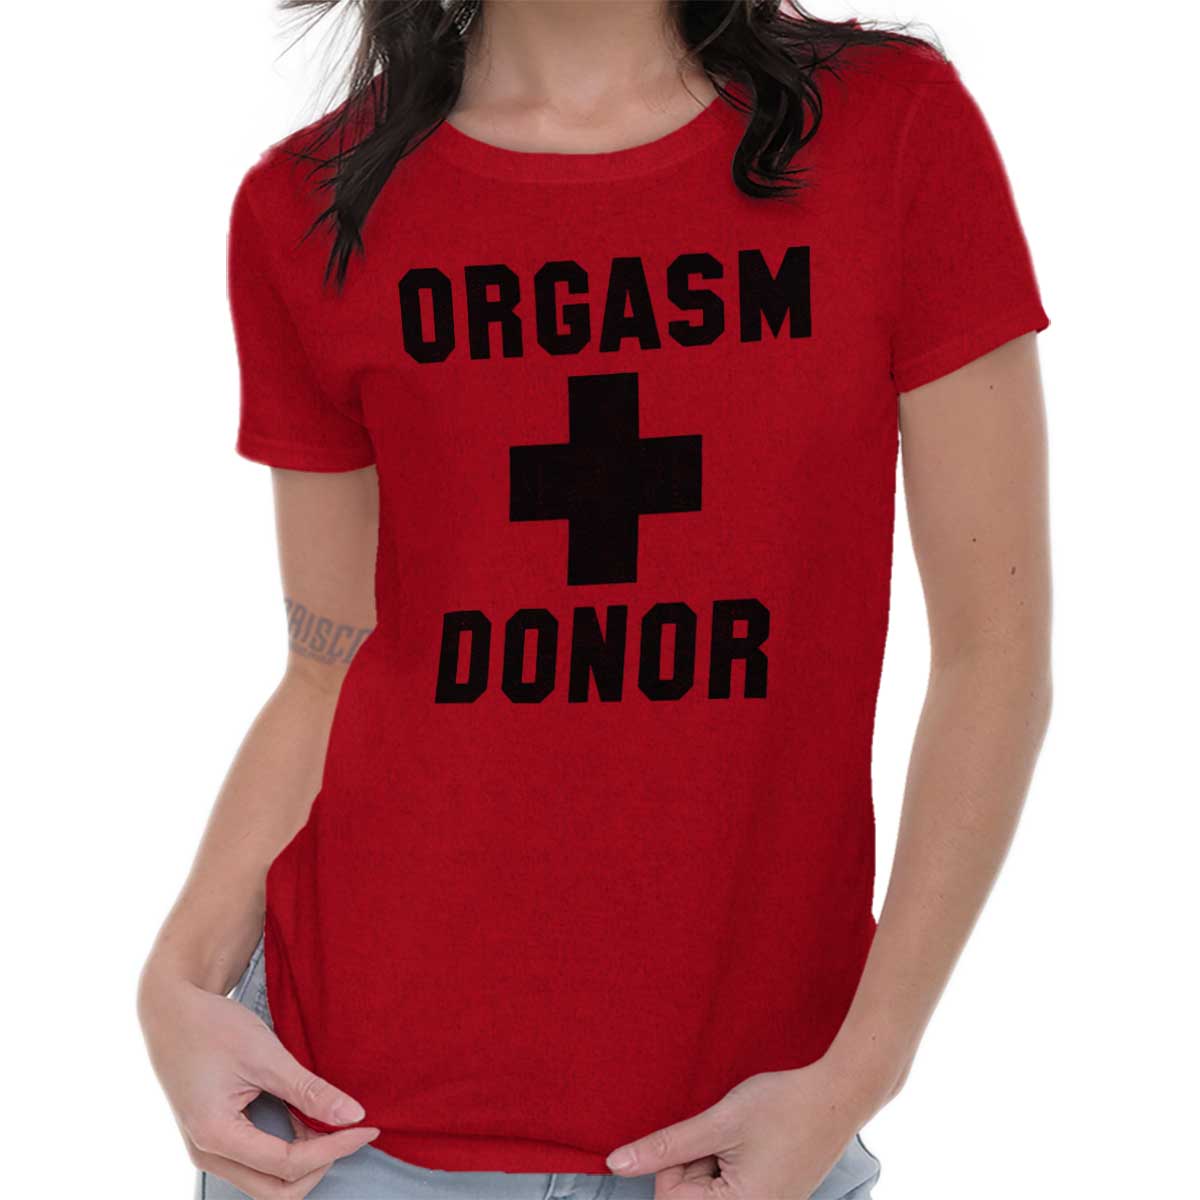 Orgasm Donor Funny Joke Offensive Humor T Graphic T Shirts For Women T Shirts Ebay